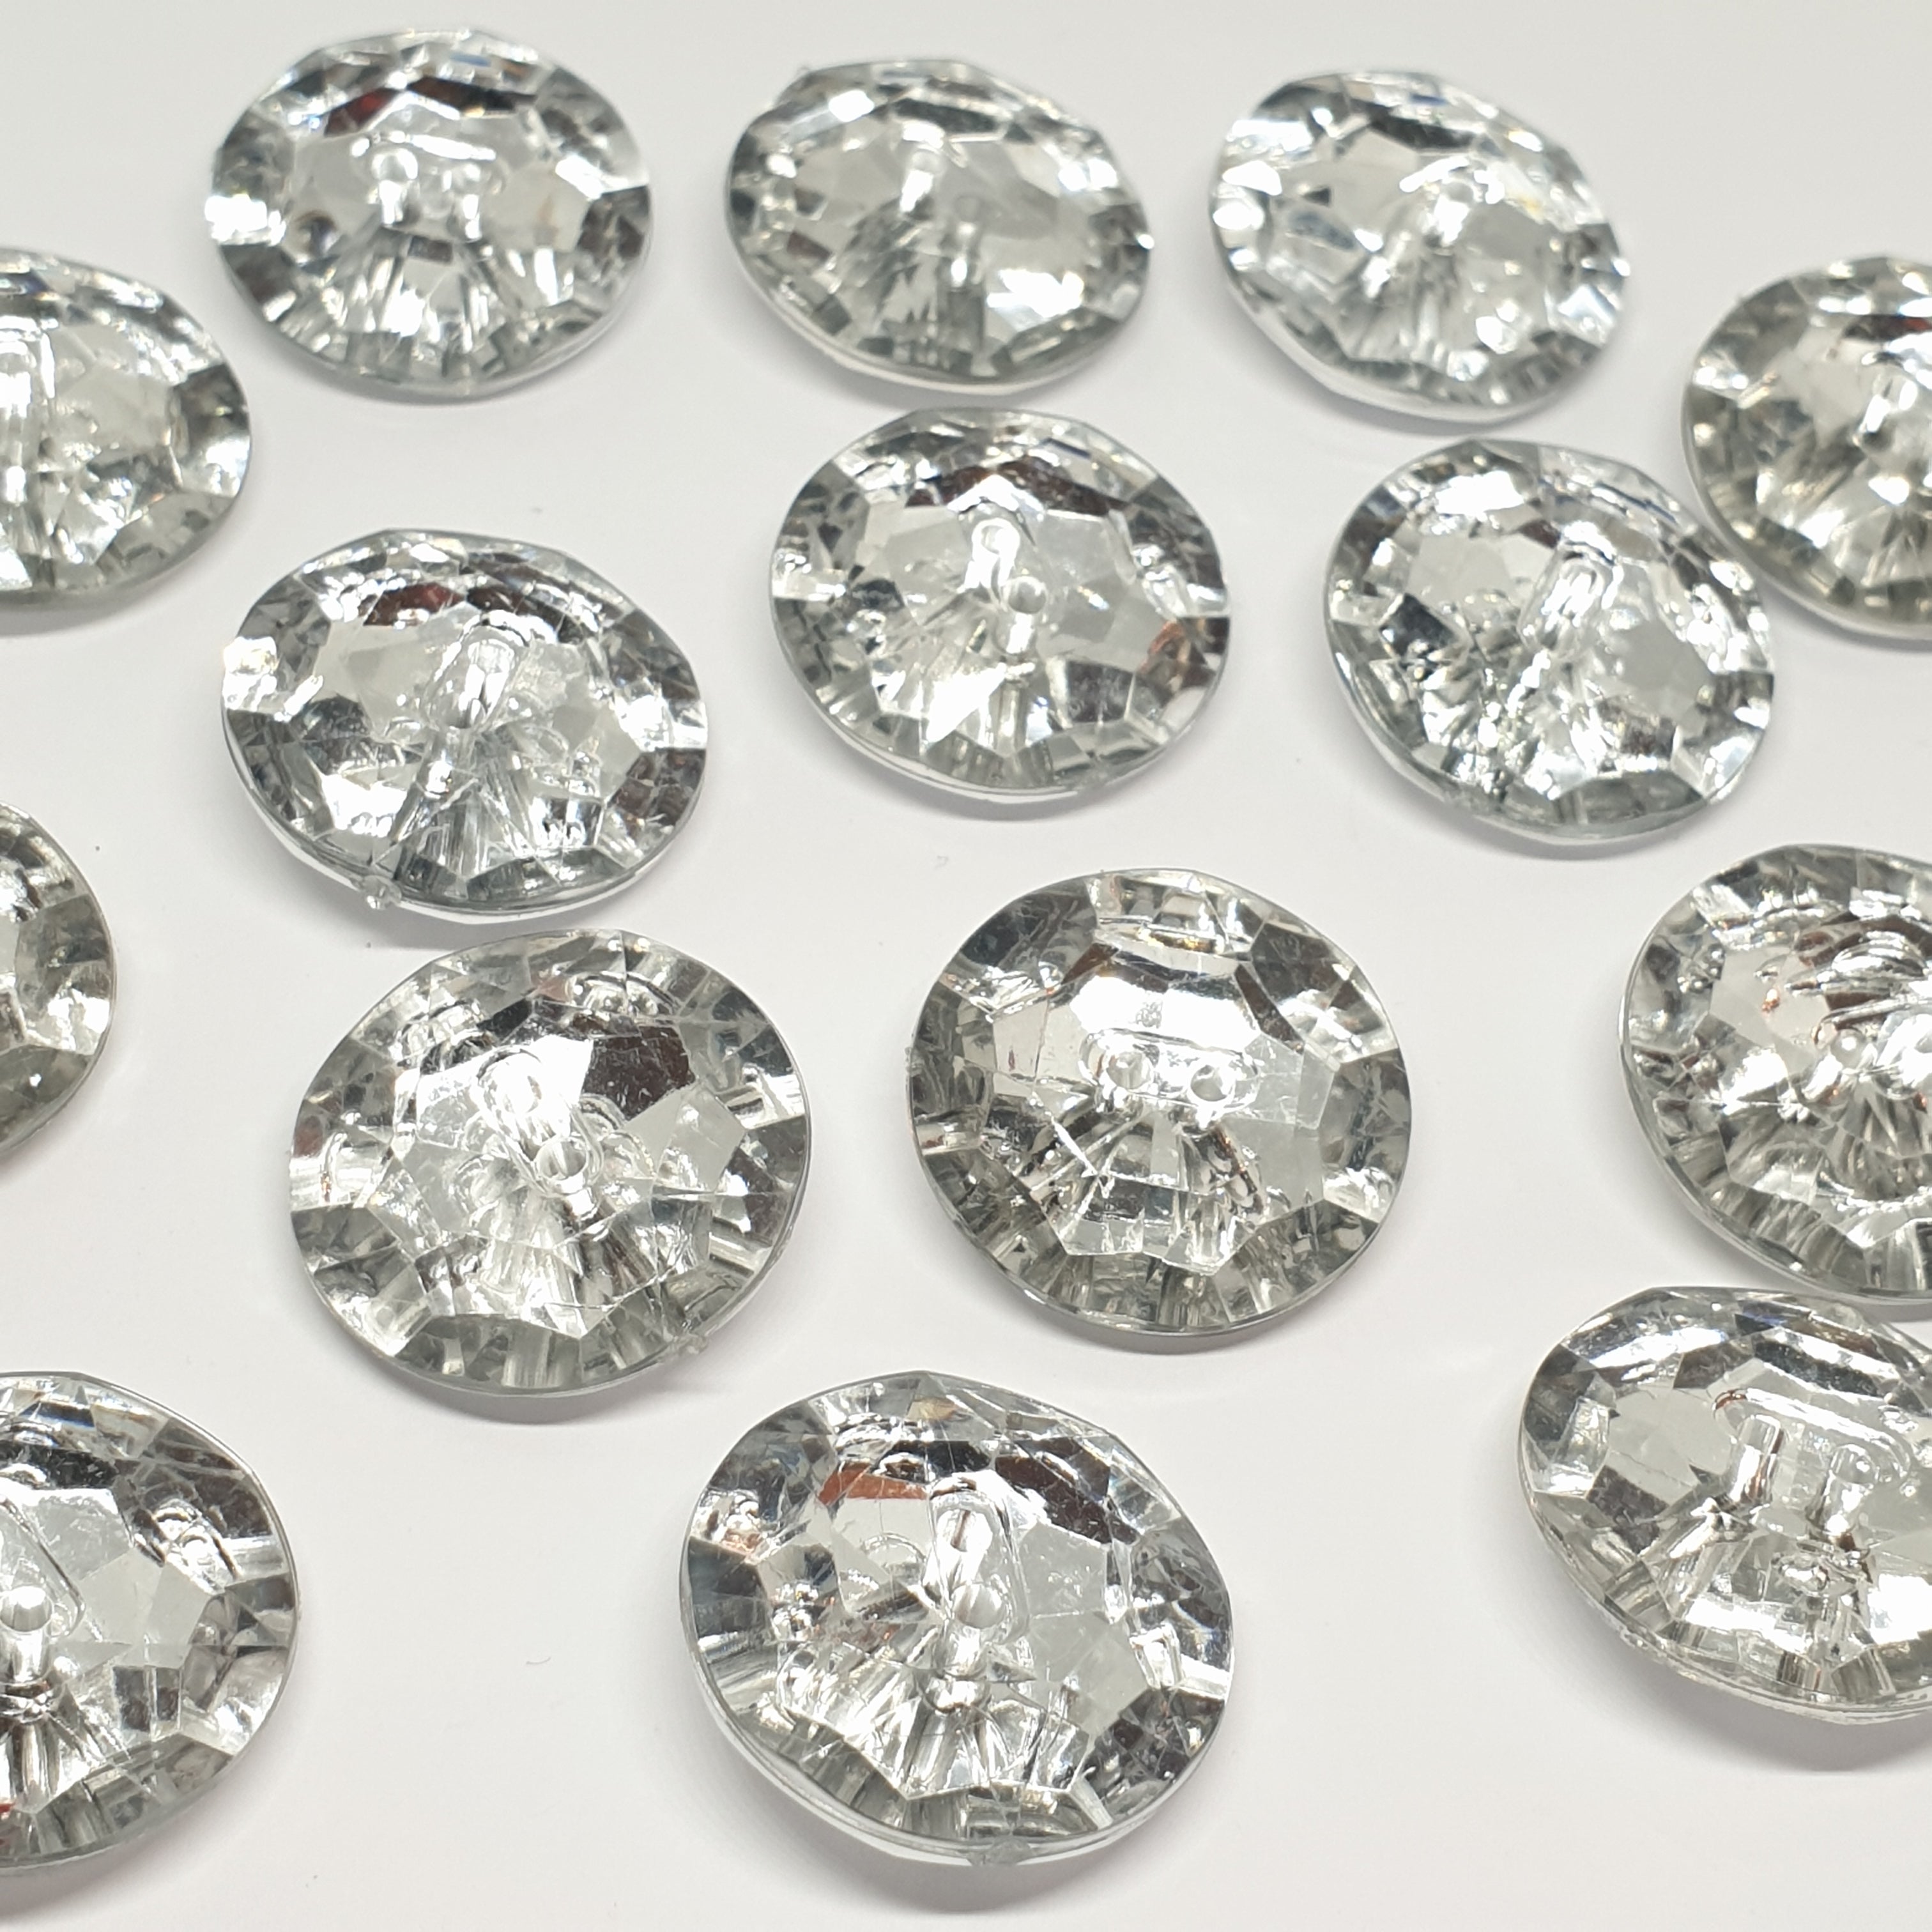 MajorCrafts 12pcs 25mm Crystal Clear Faceted 2 Holes Large Round Acrylic Sewing Buttons